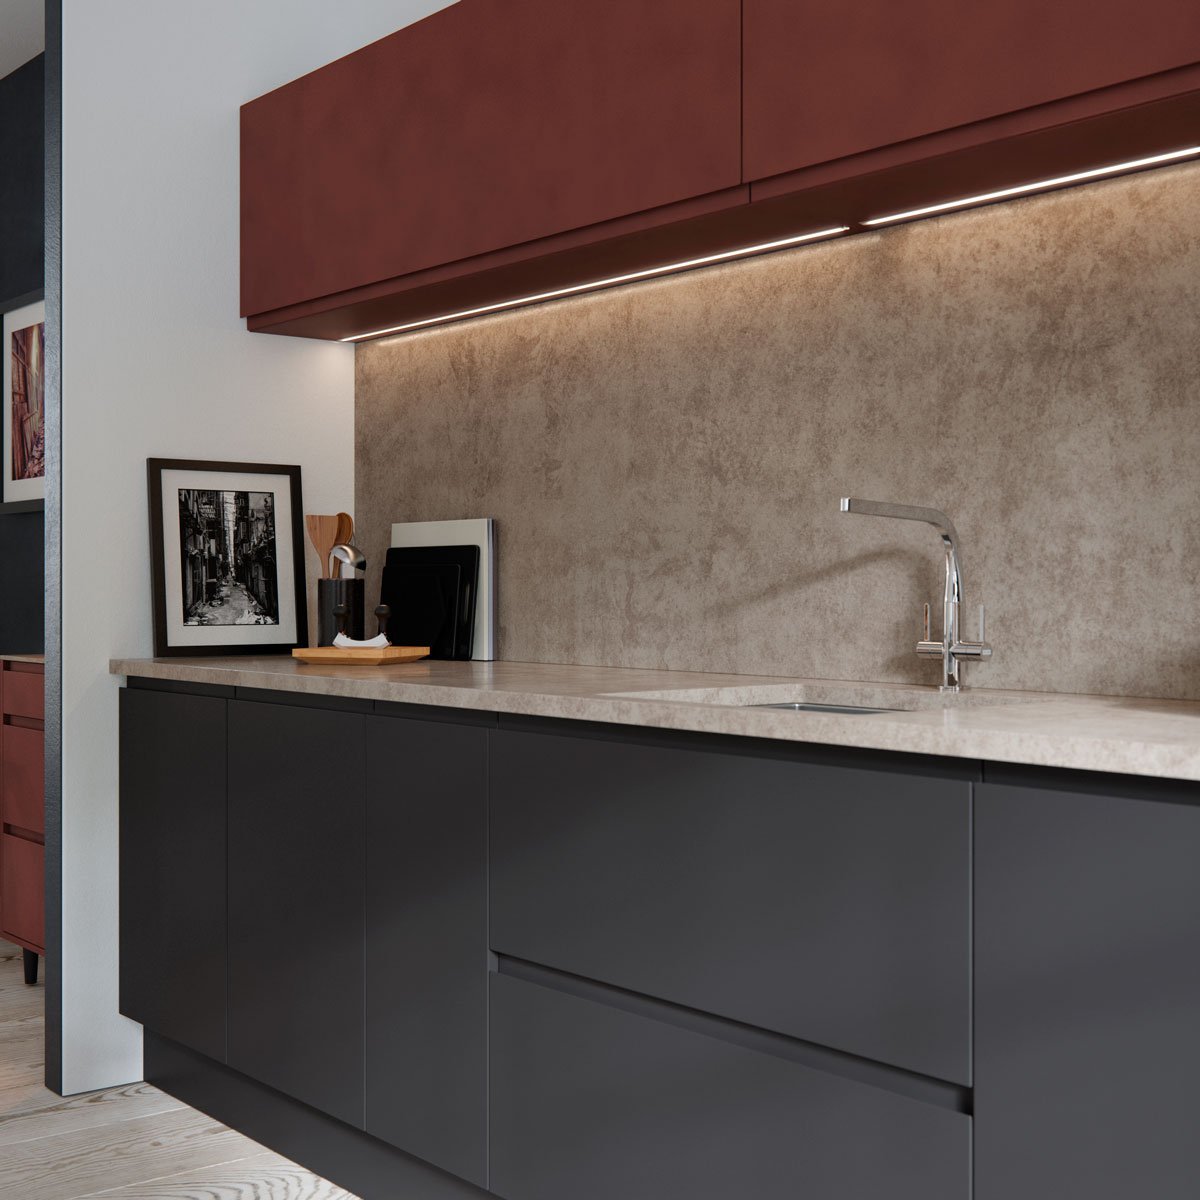 ACONBURY | A combination of bold finishes, such as bespoke Graphite & Foundry Tarnished Copper create a stylish on-trend look #bespokekitchen #greykitchen #copperkitchen #mattkitchen #paintedkitchen